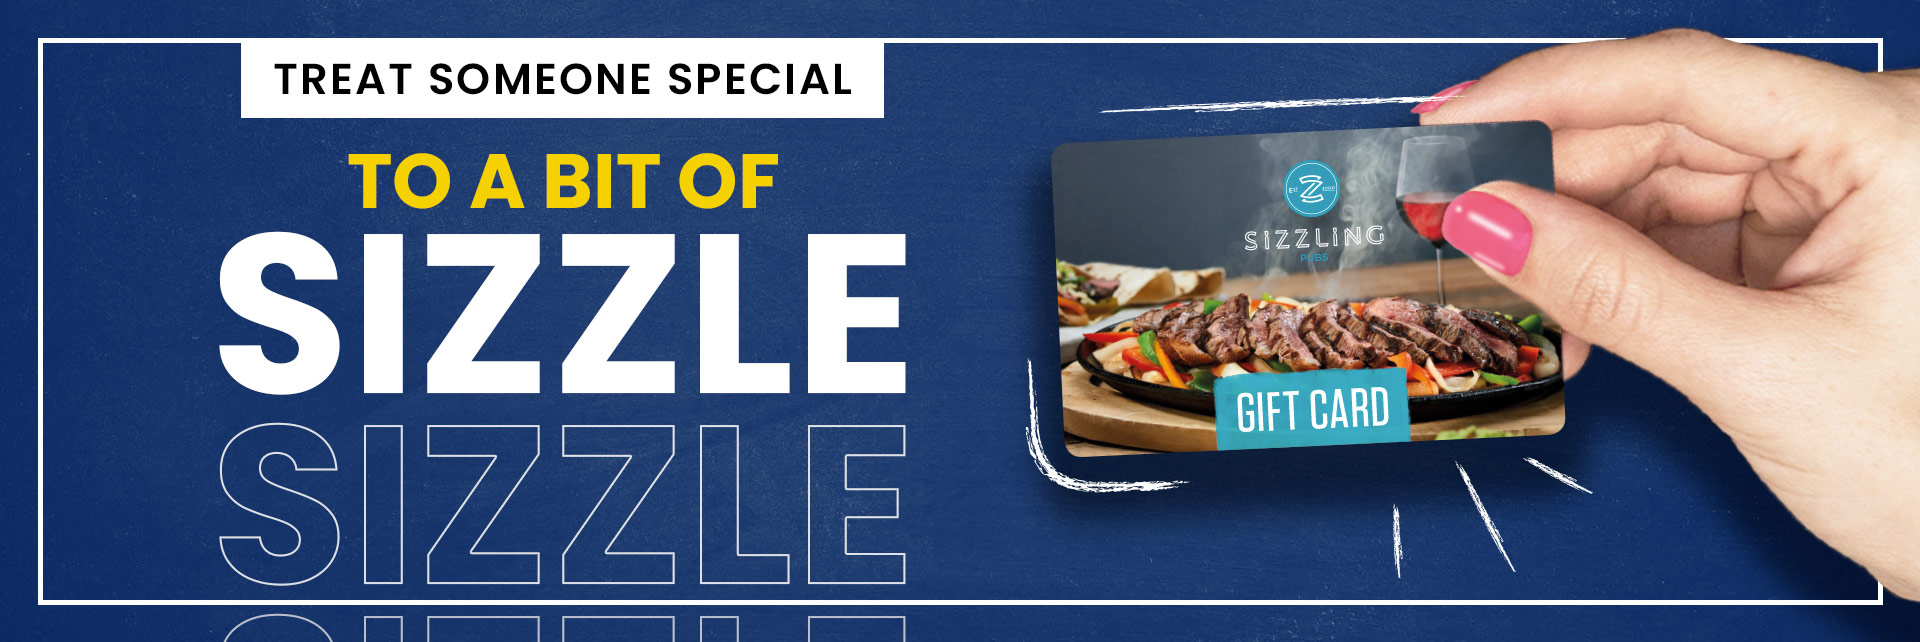 Sizzling Pubs Gift Card at The Traveller's Home in Bexley Heath